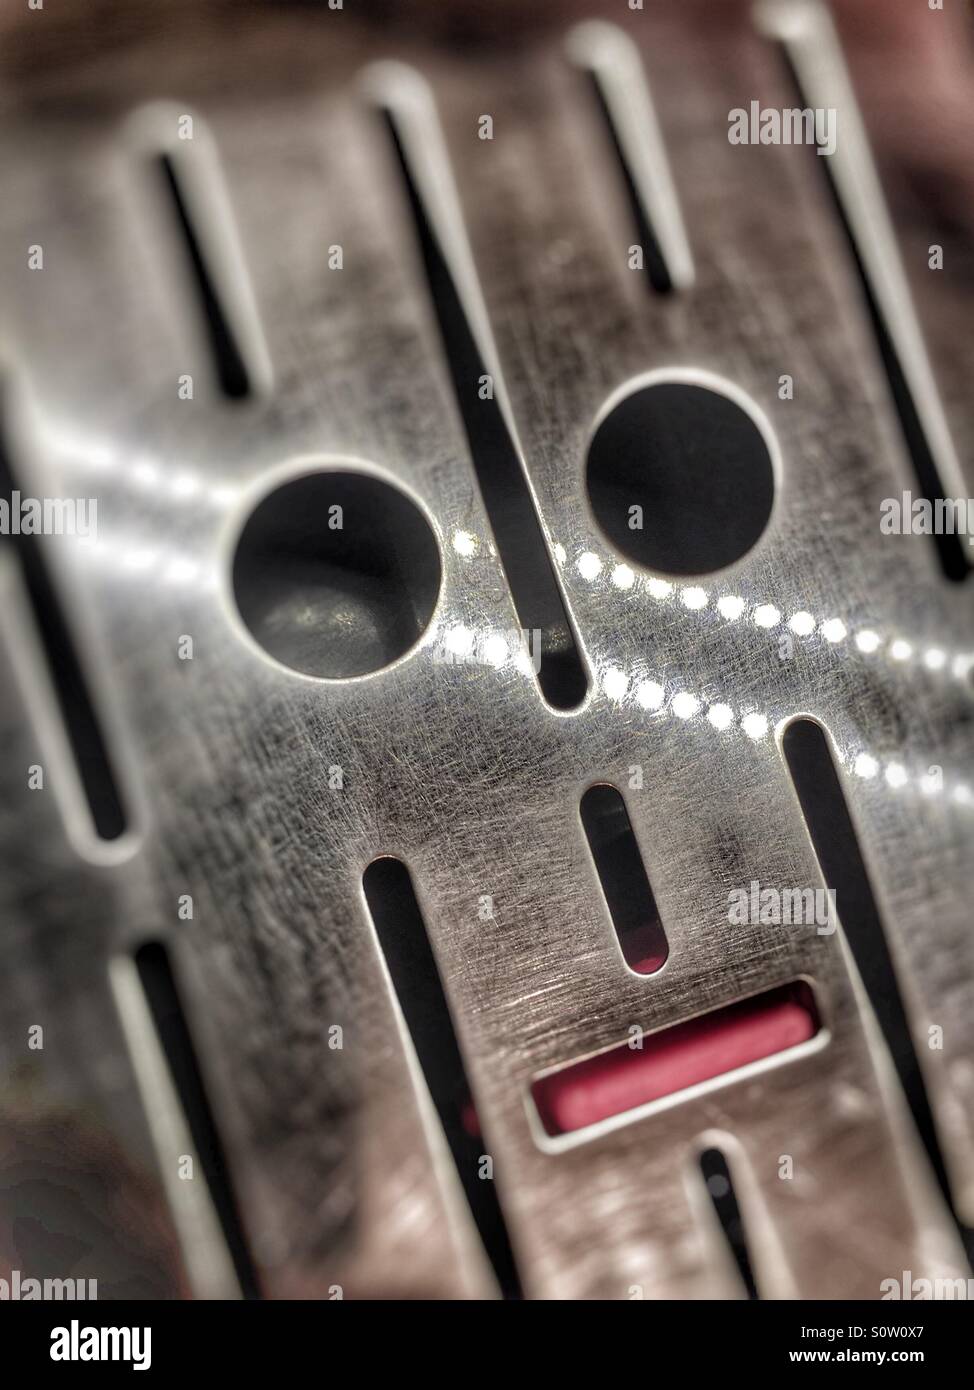 Abstract face in a coffee machine grill Stock Photo